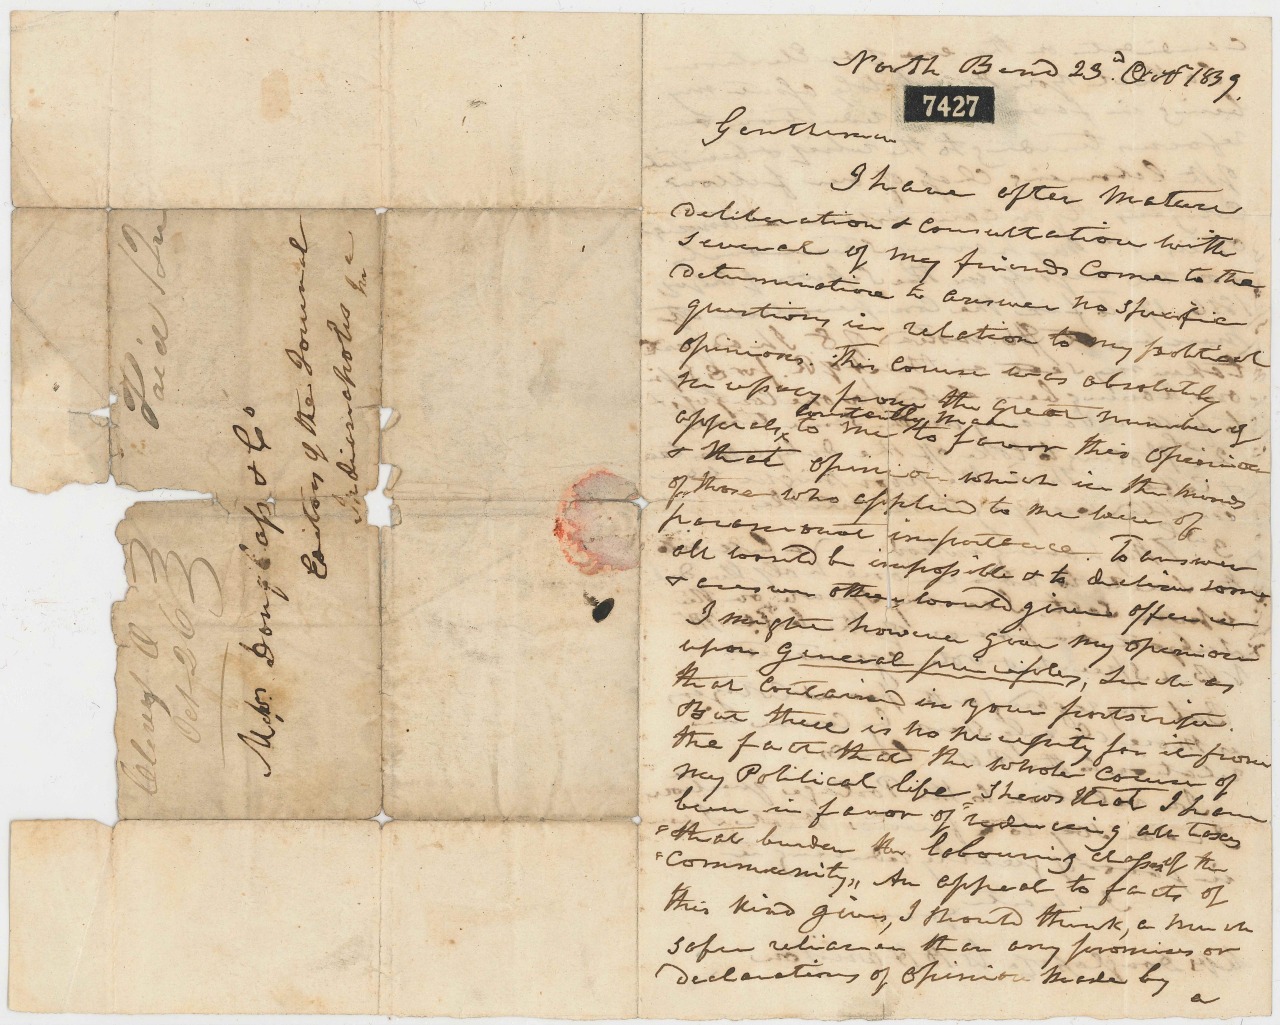 Letter from William Henry Harrison in The Children's Museum Collections department